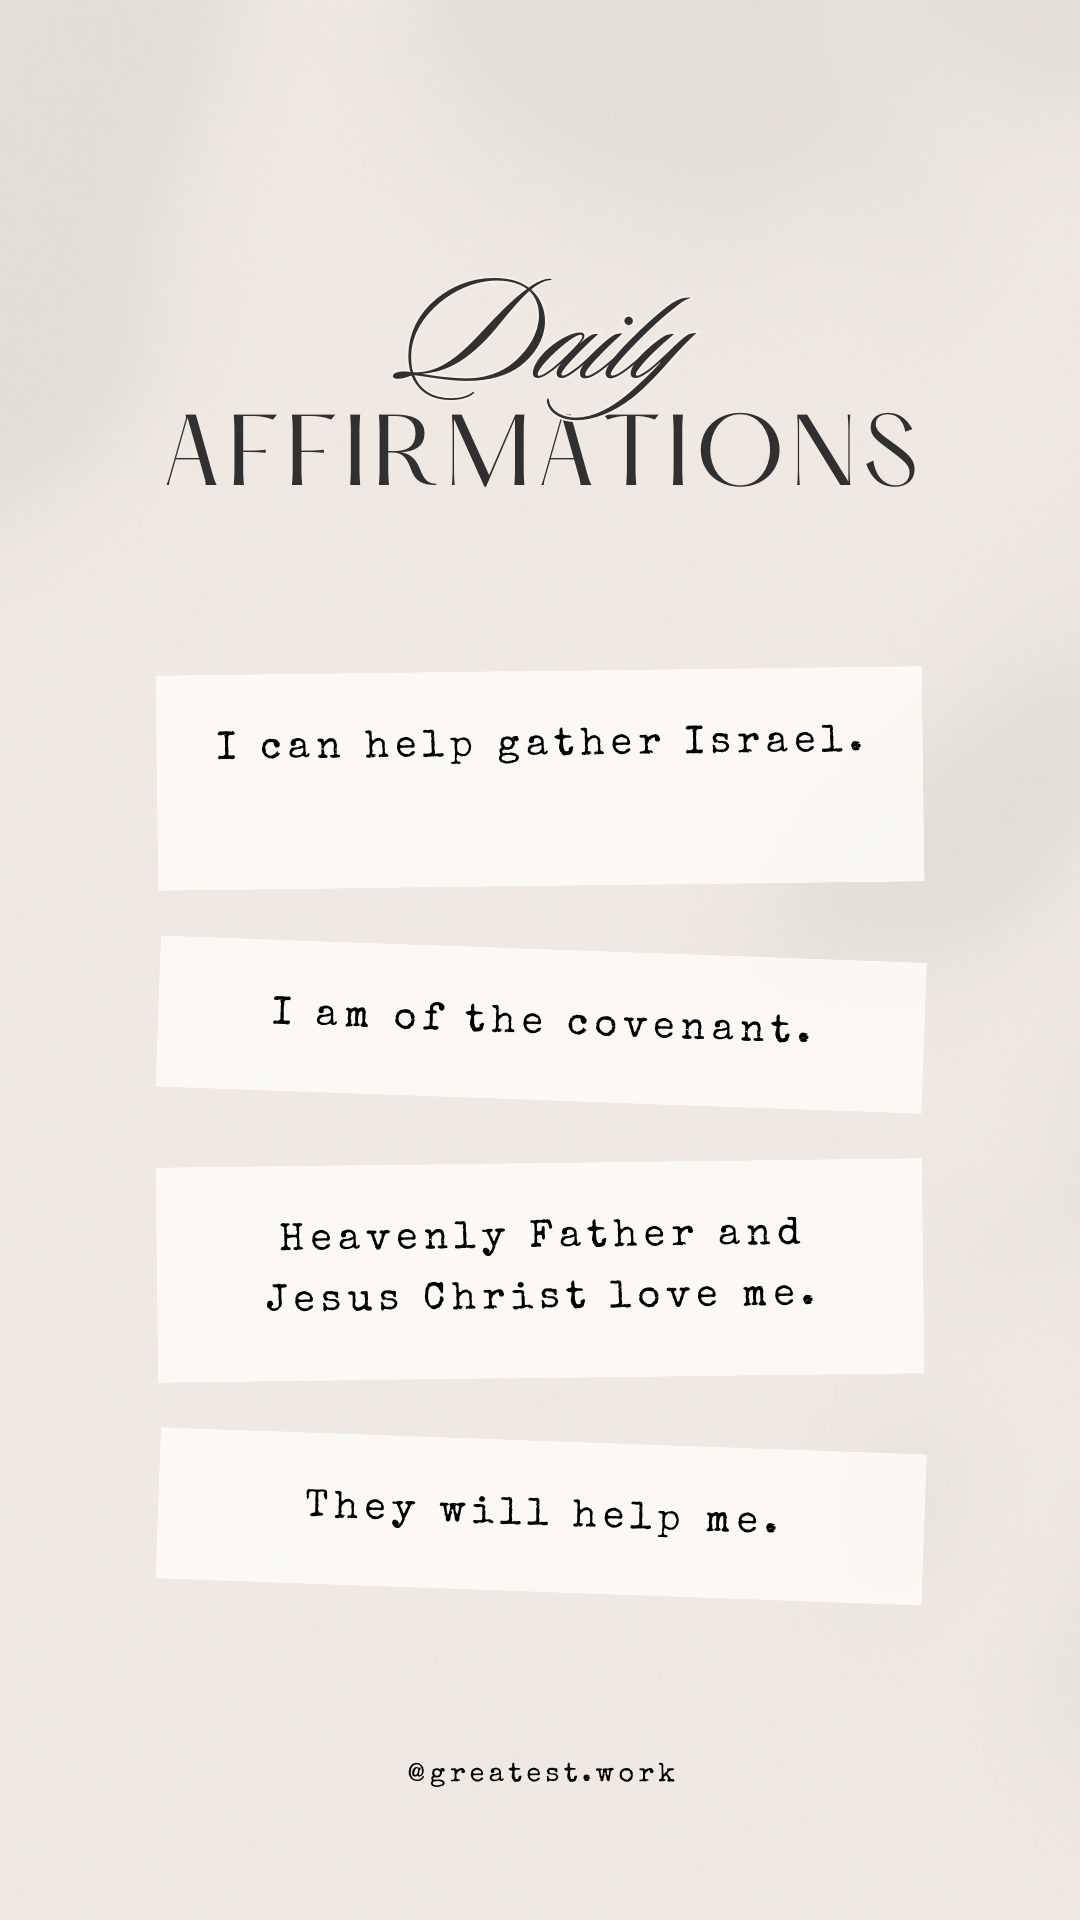 Daily Affirmations for Gathering Israel